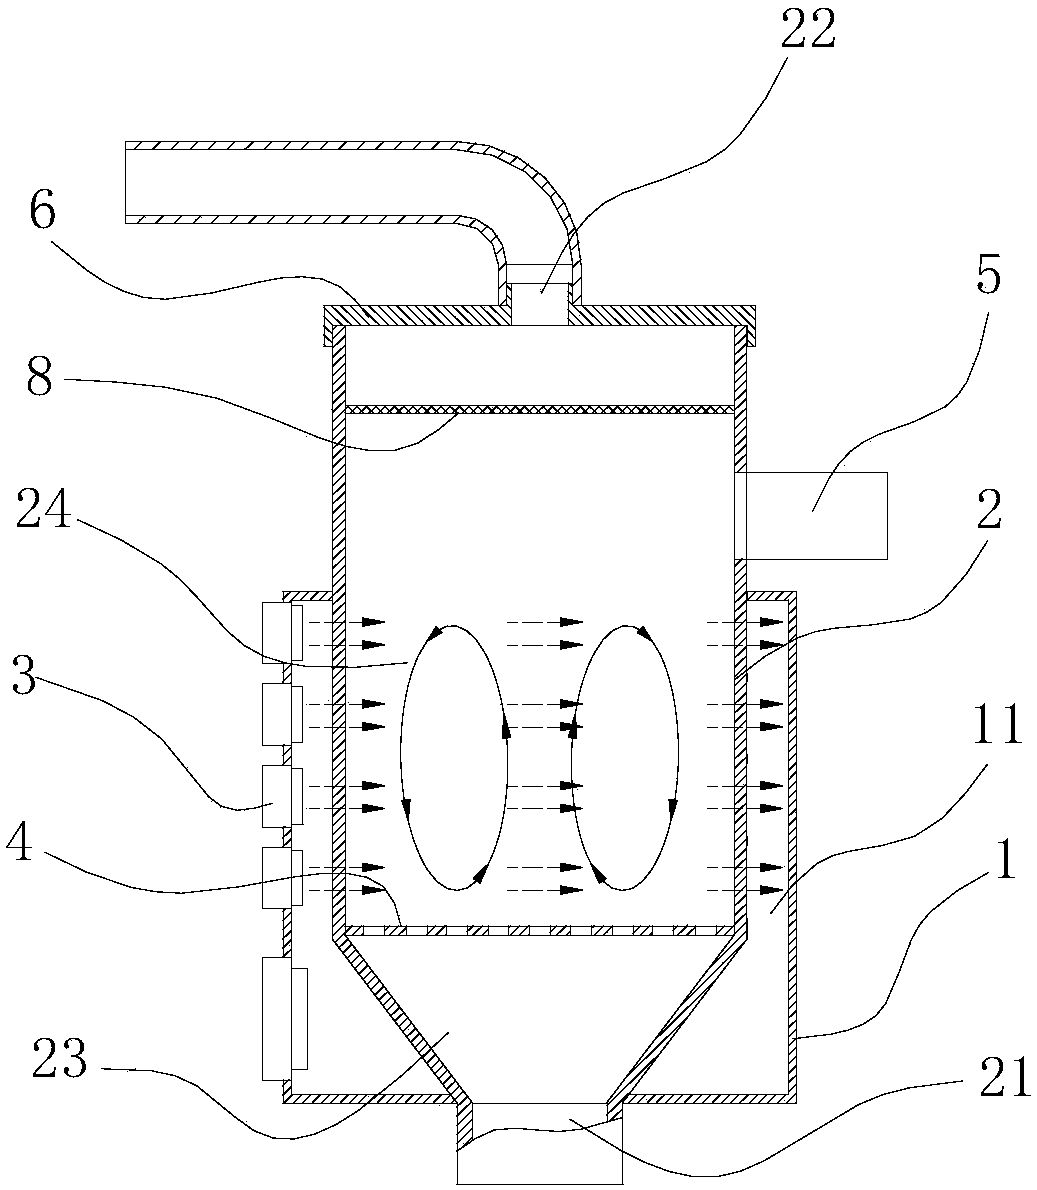 Microwave processing multi-phase fluidized bed reactor and process for treating phosphogypsum